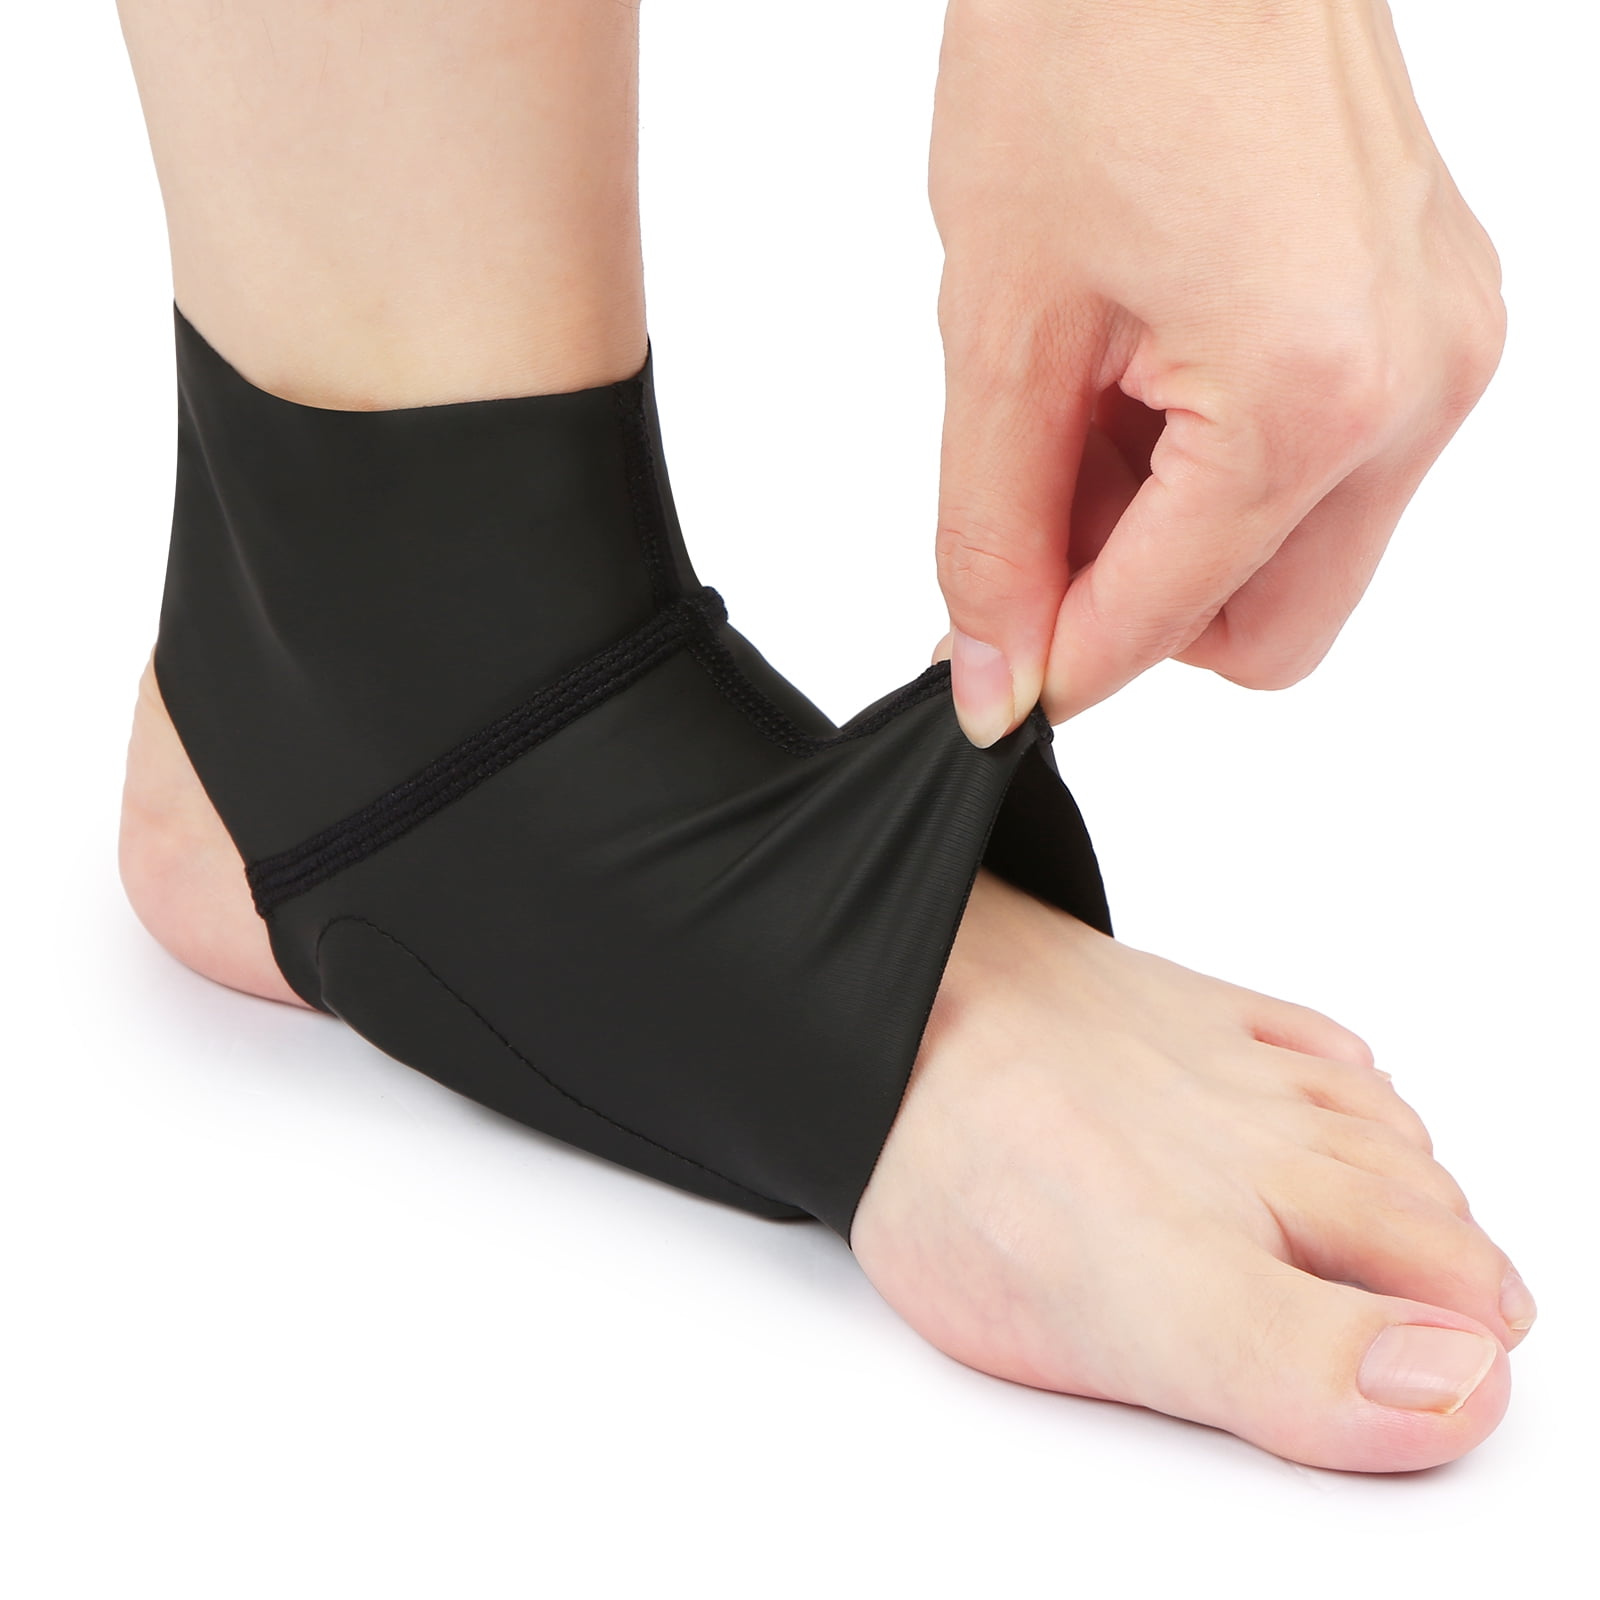 Copper Arch Supports | Doctor-Recommended for Flat Feet Pain